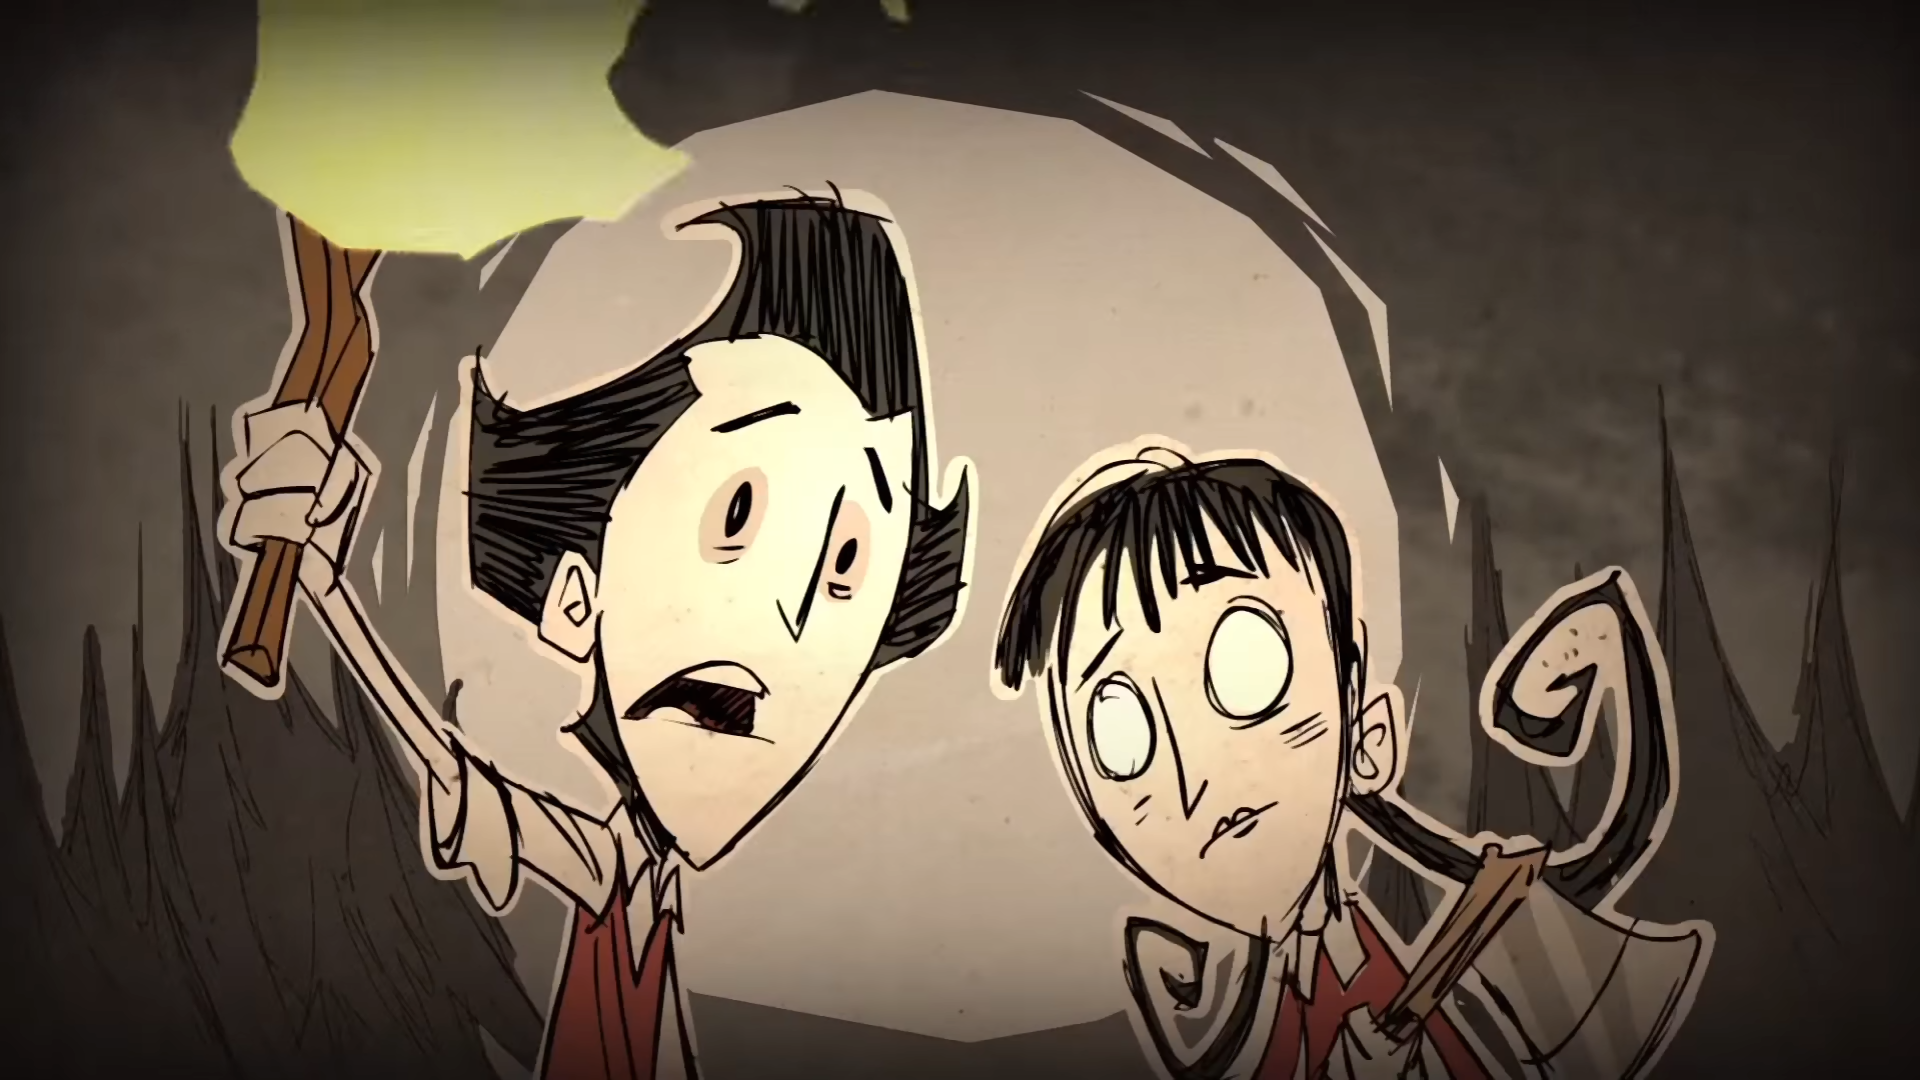 Don t starve together six update. Донт старве. Don старв together. Don't Starve Starve Starve together. Klei don't Starve 2022.